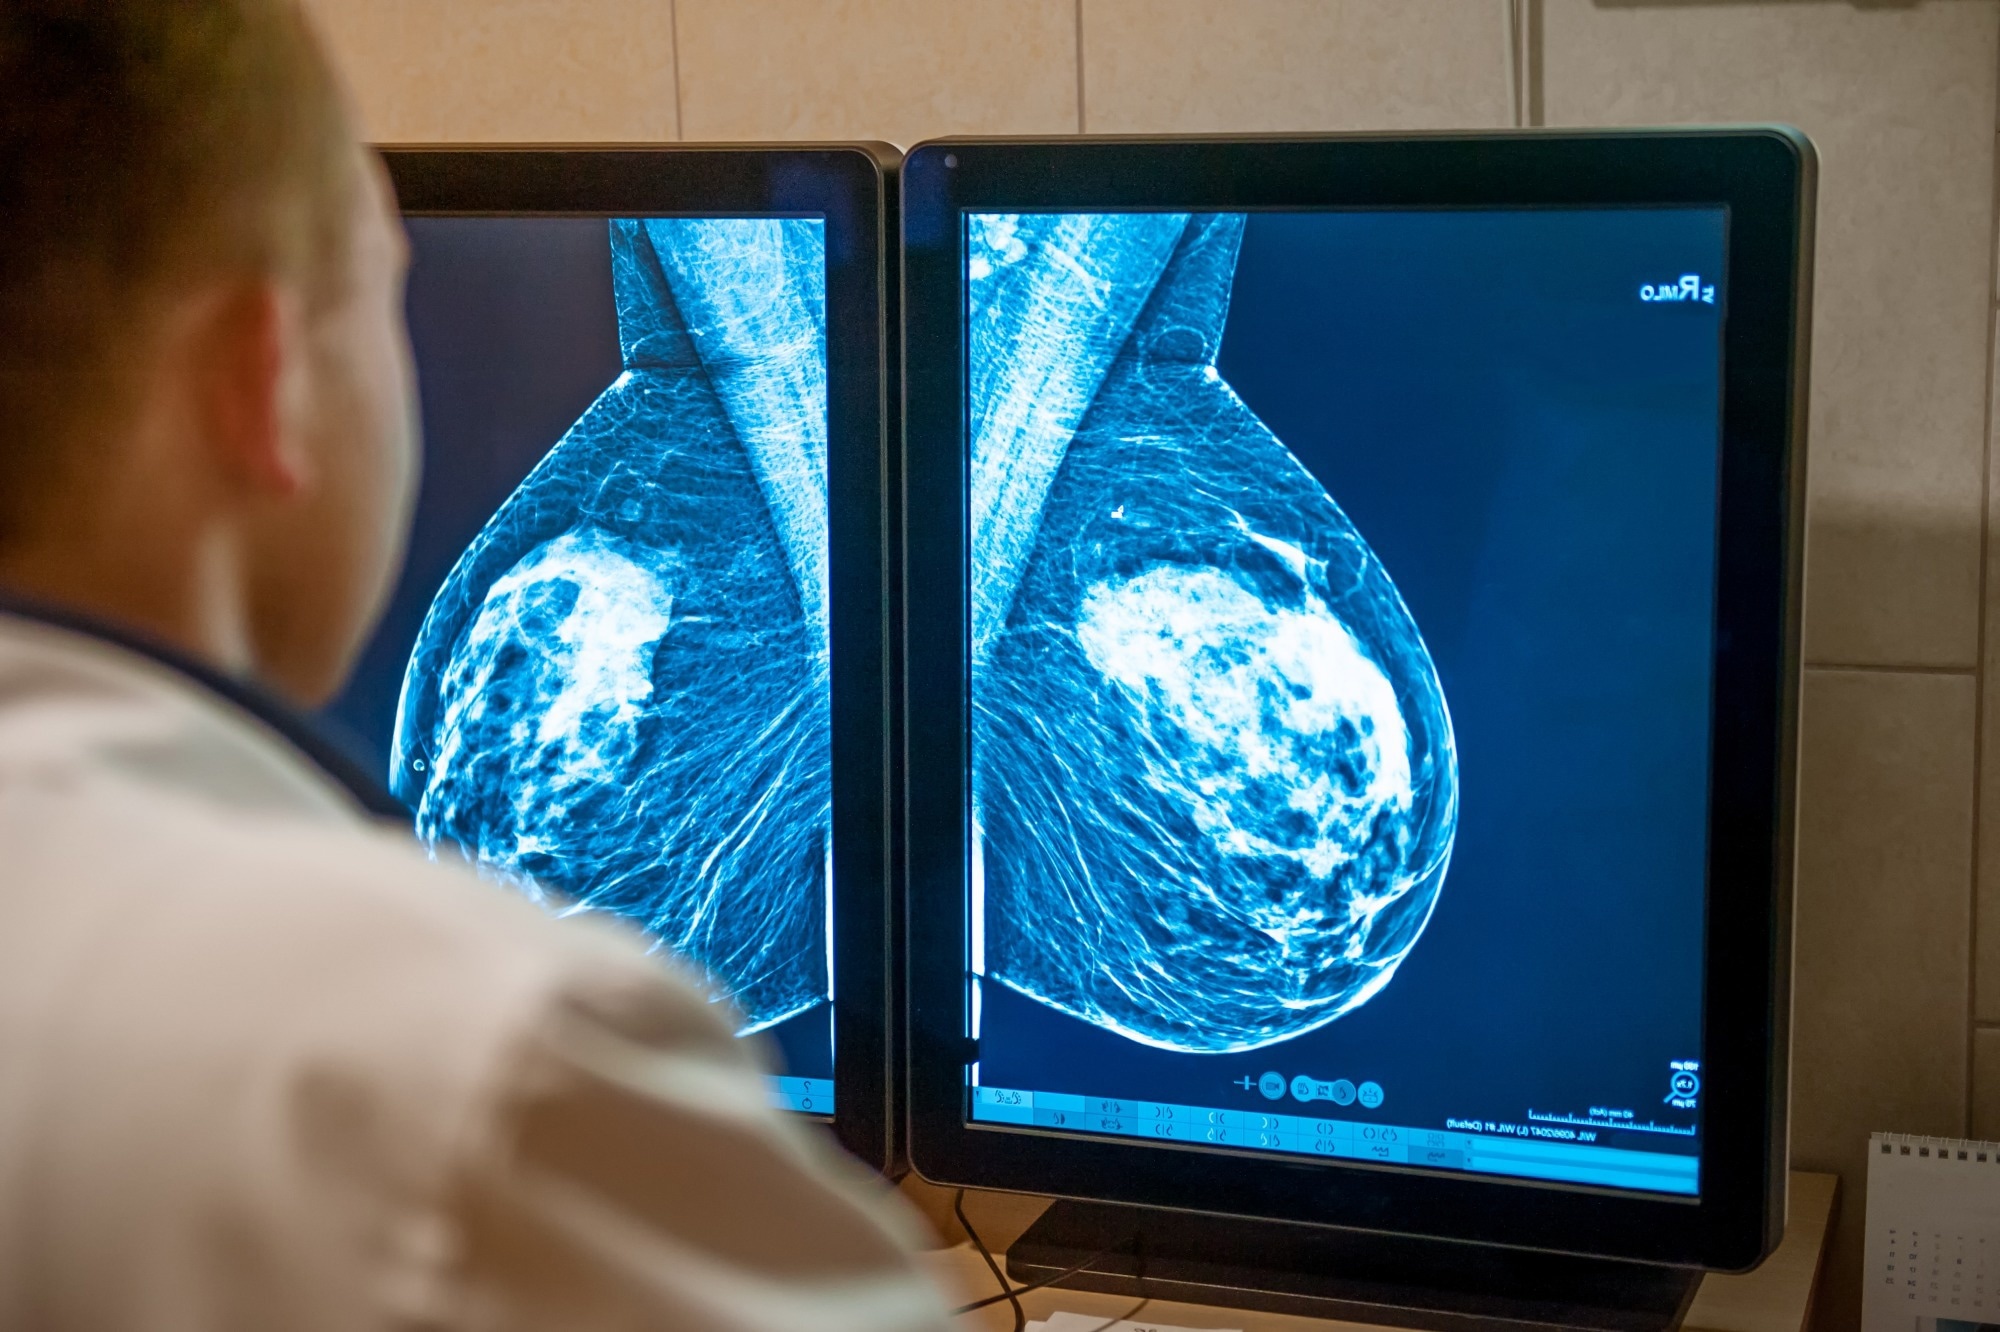 Study: Sociodemographic variations in women’s reports of discussions with clinicians about breast density. Image Credit: Okrasiuk / Shutterstock.com